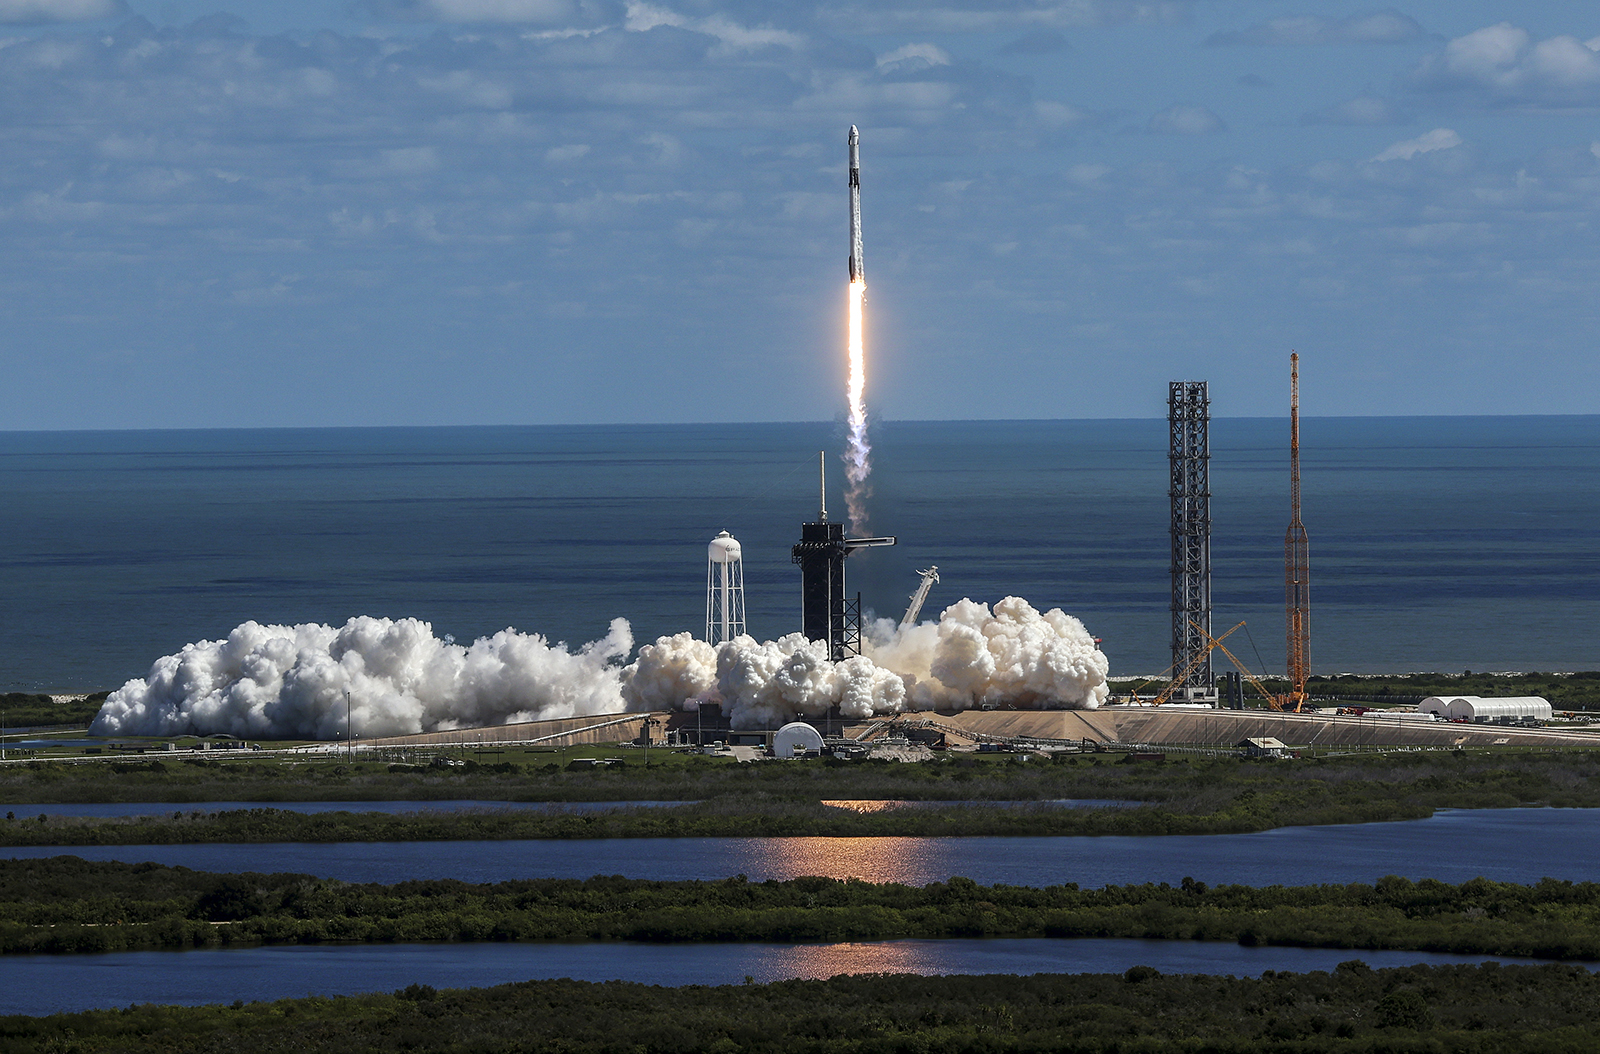 SpaceX’s Falcon 9 rocket with the Dragon spacecraft atop took off from Launch Complex 39A at NASA's Kennedy Space Center today in Cape Canaveral, Florida. 